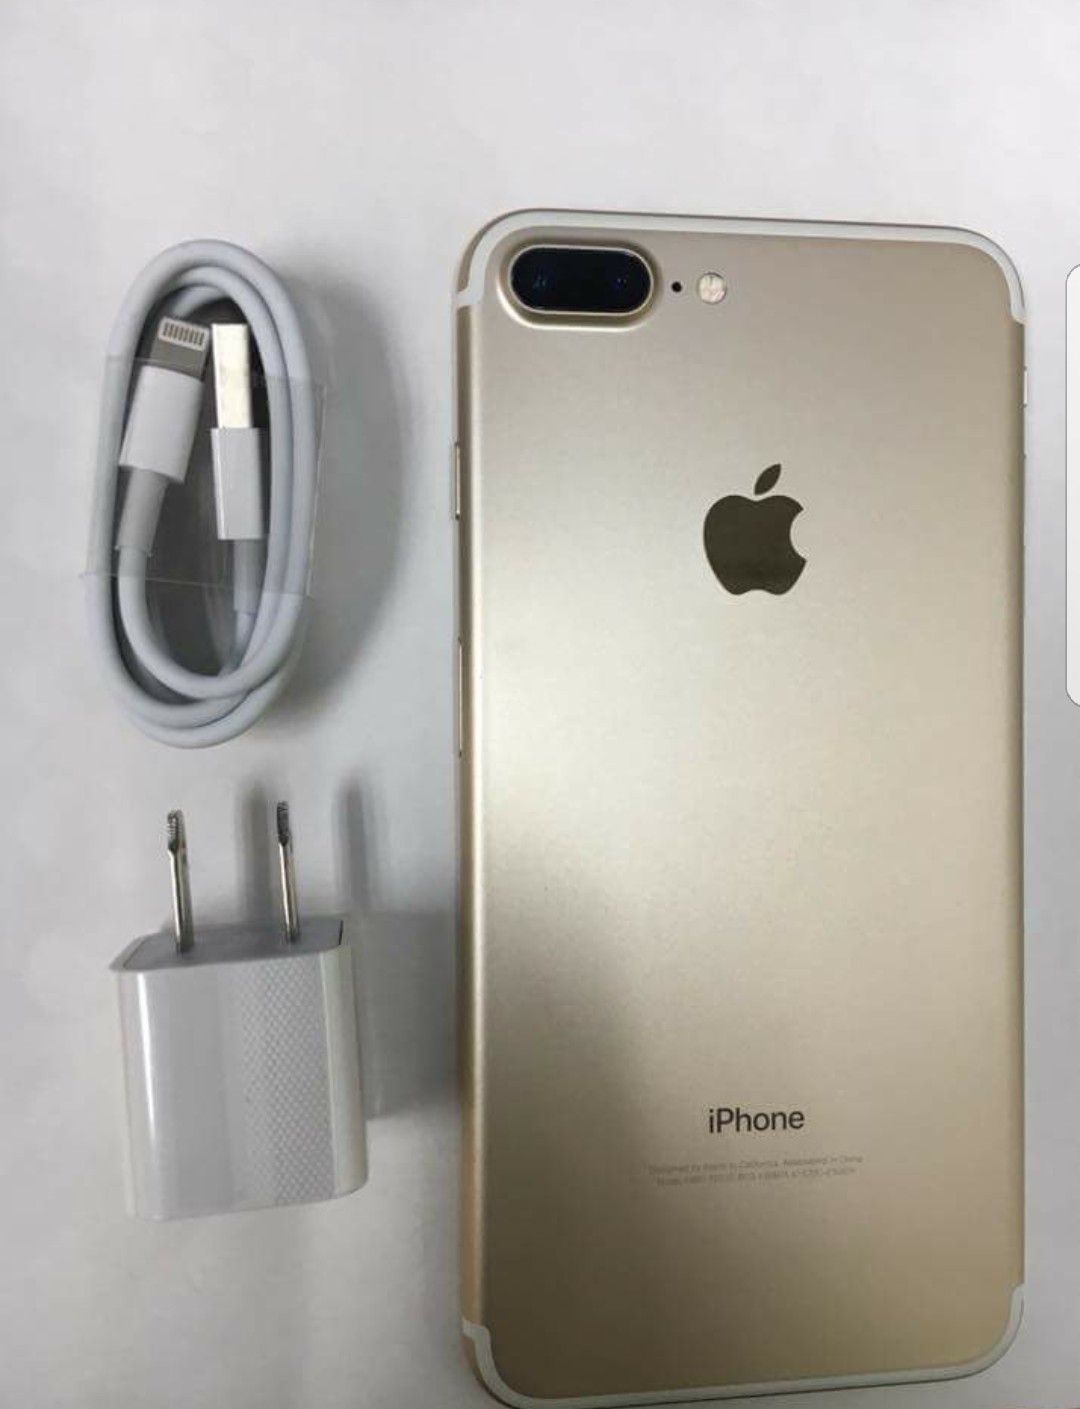 iPhone 7 Plus 32GB. Factory Unlocked and Usable with Any Company Carrier SIM Any Country